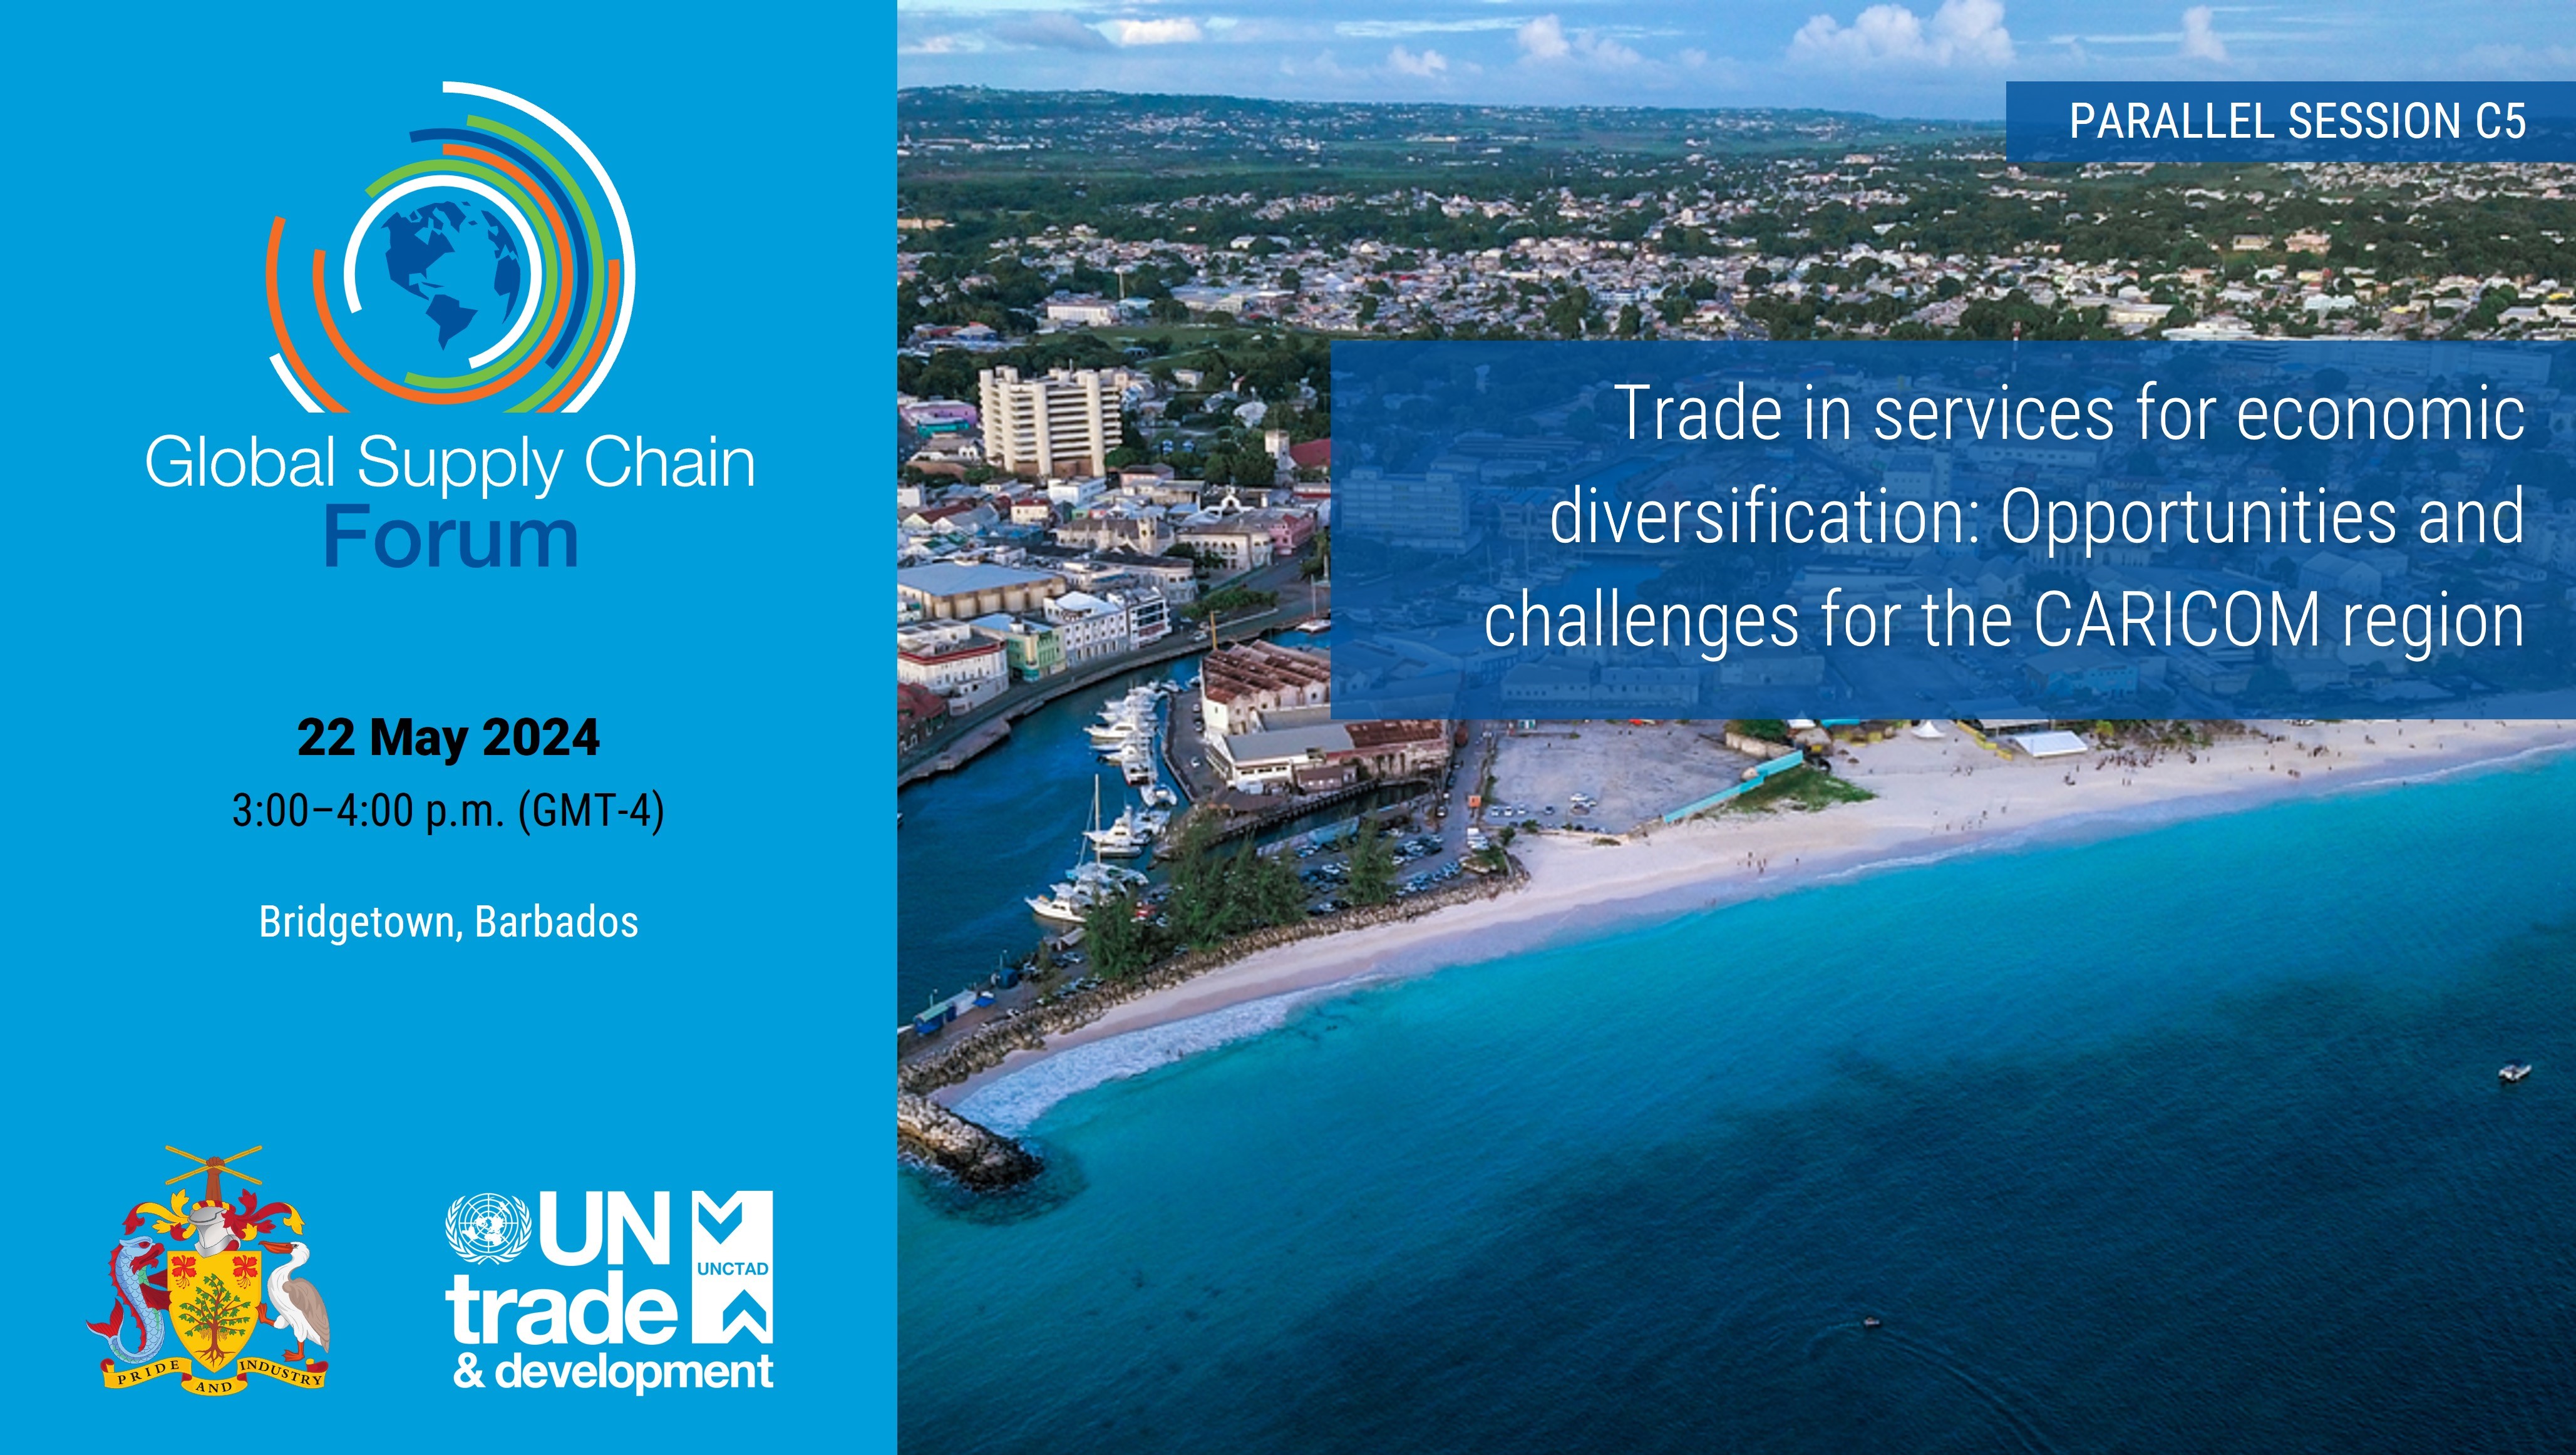 Trade in services for economic diversification: Opportunities and challenges for the Caribbean Community region